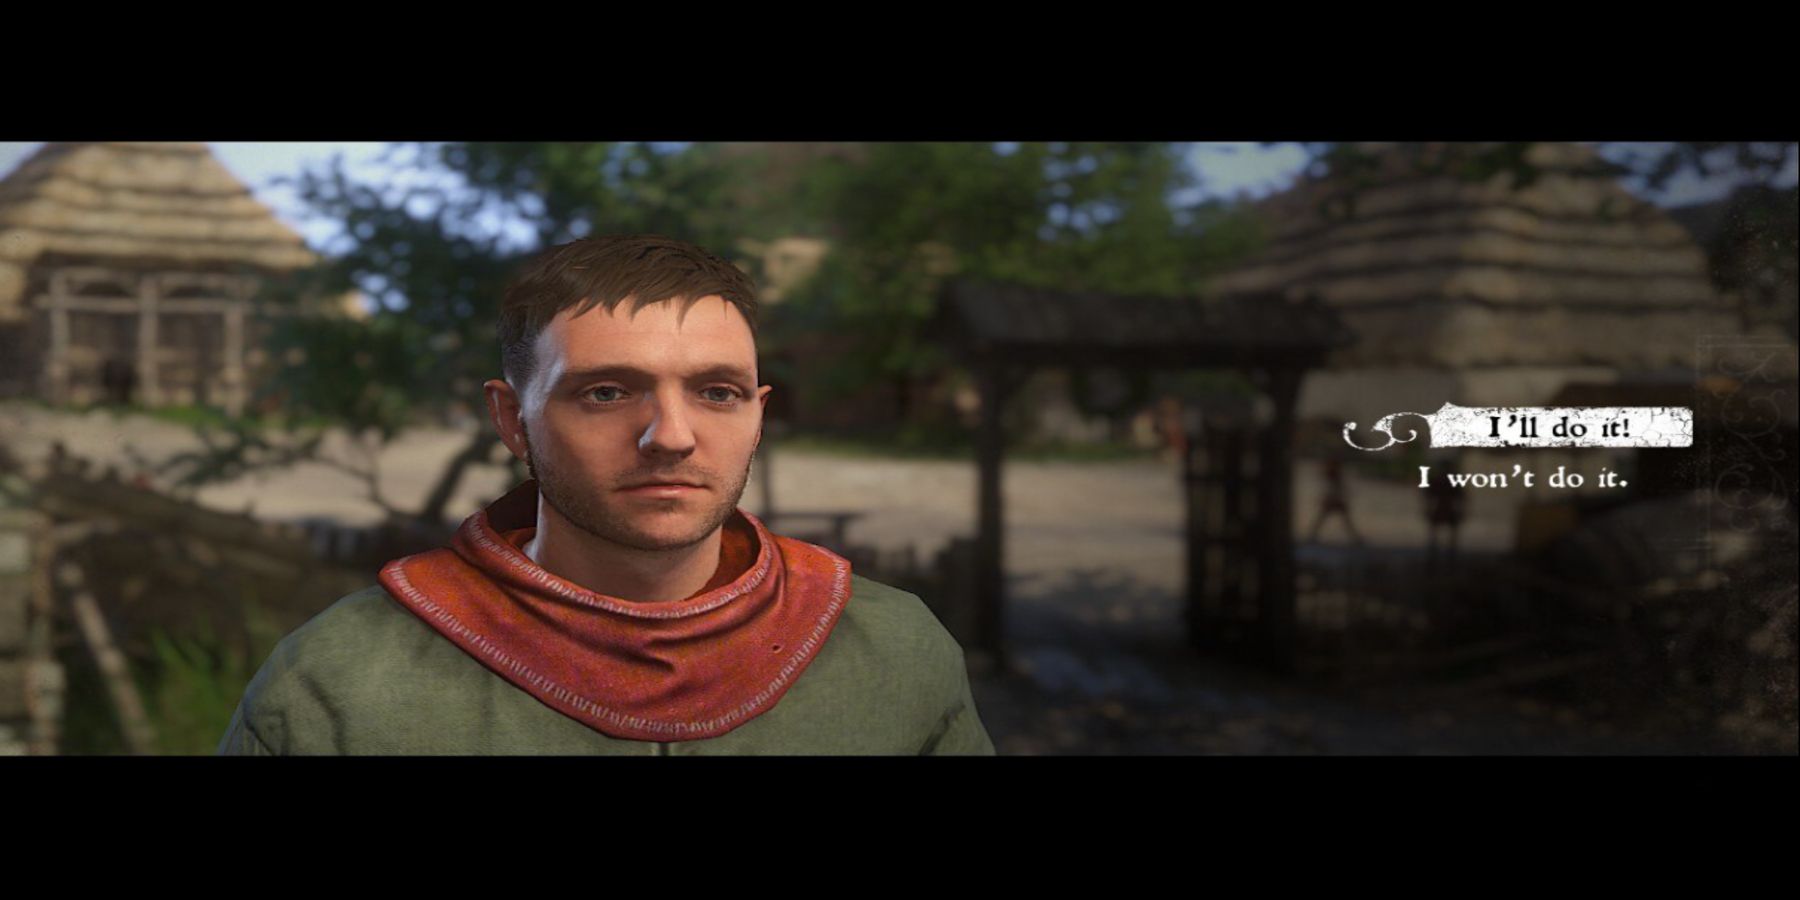 Throw Manure or Not Kingdom Come Deliverance